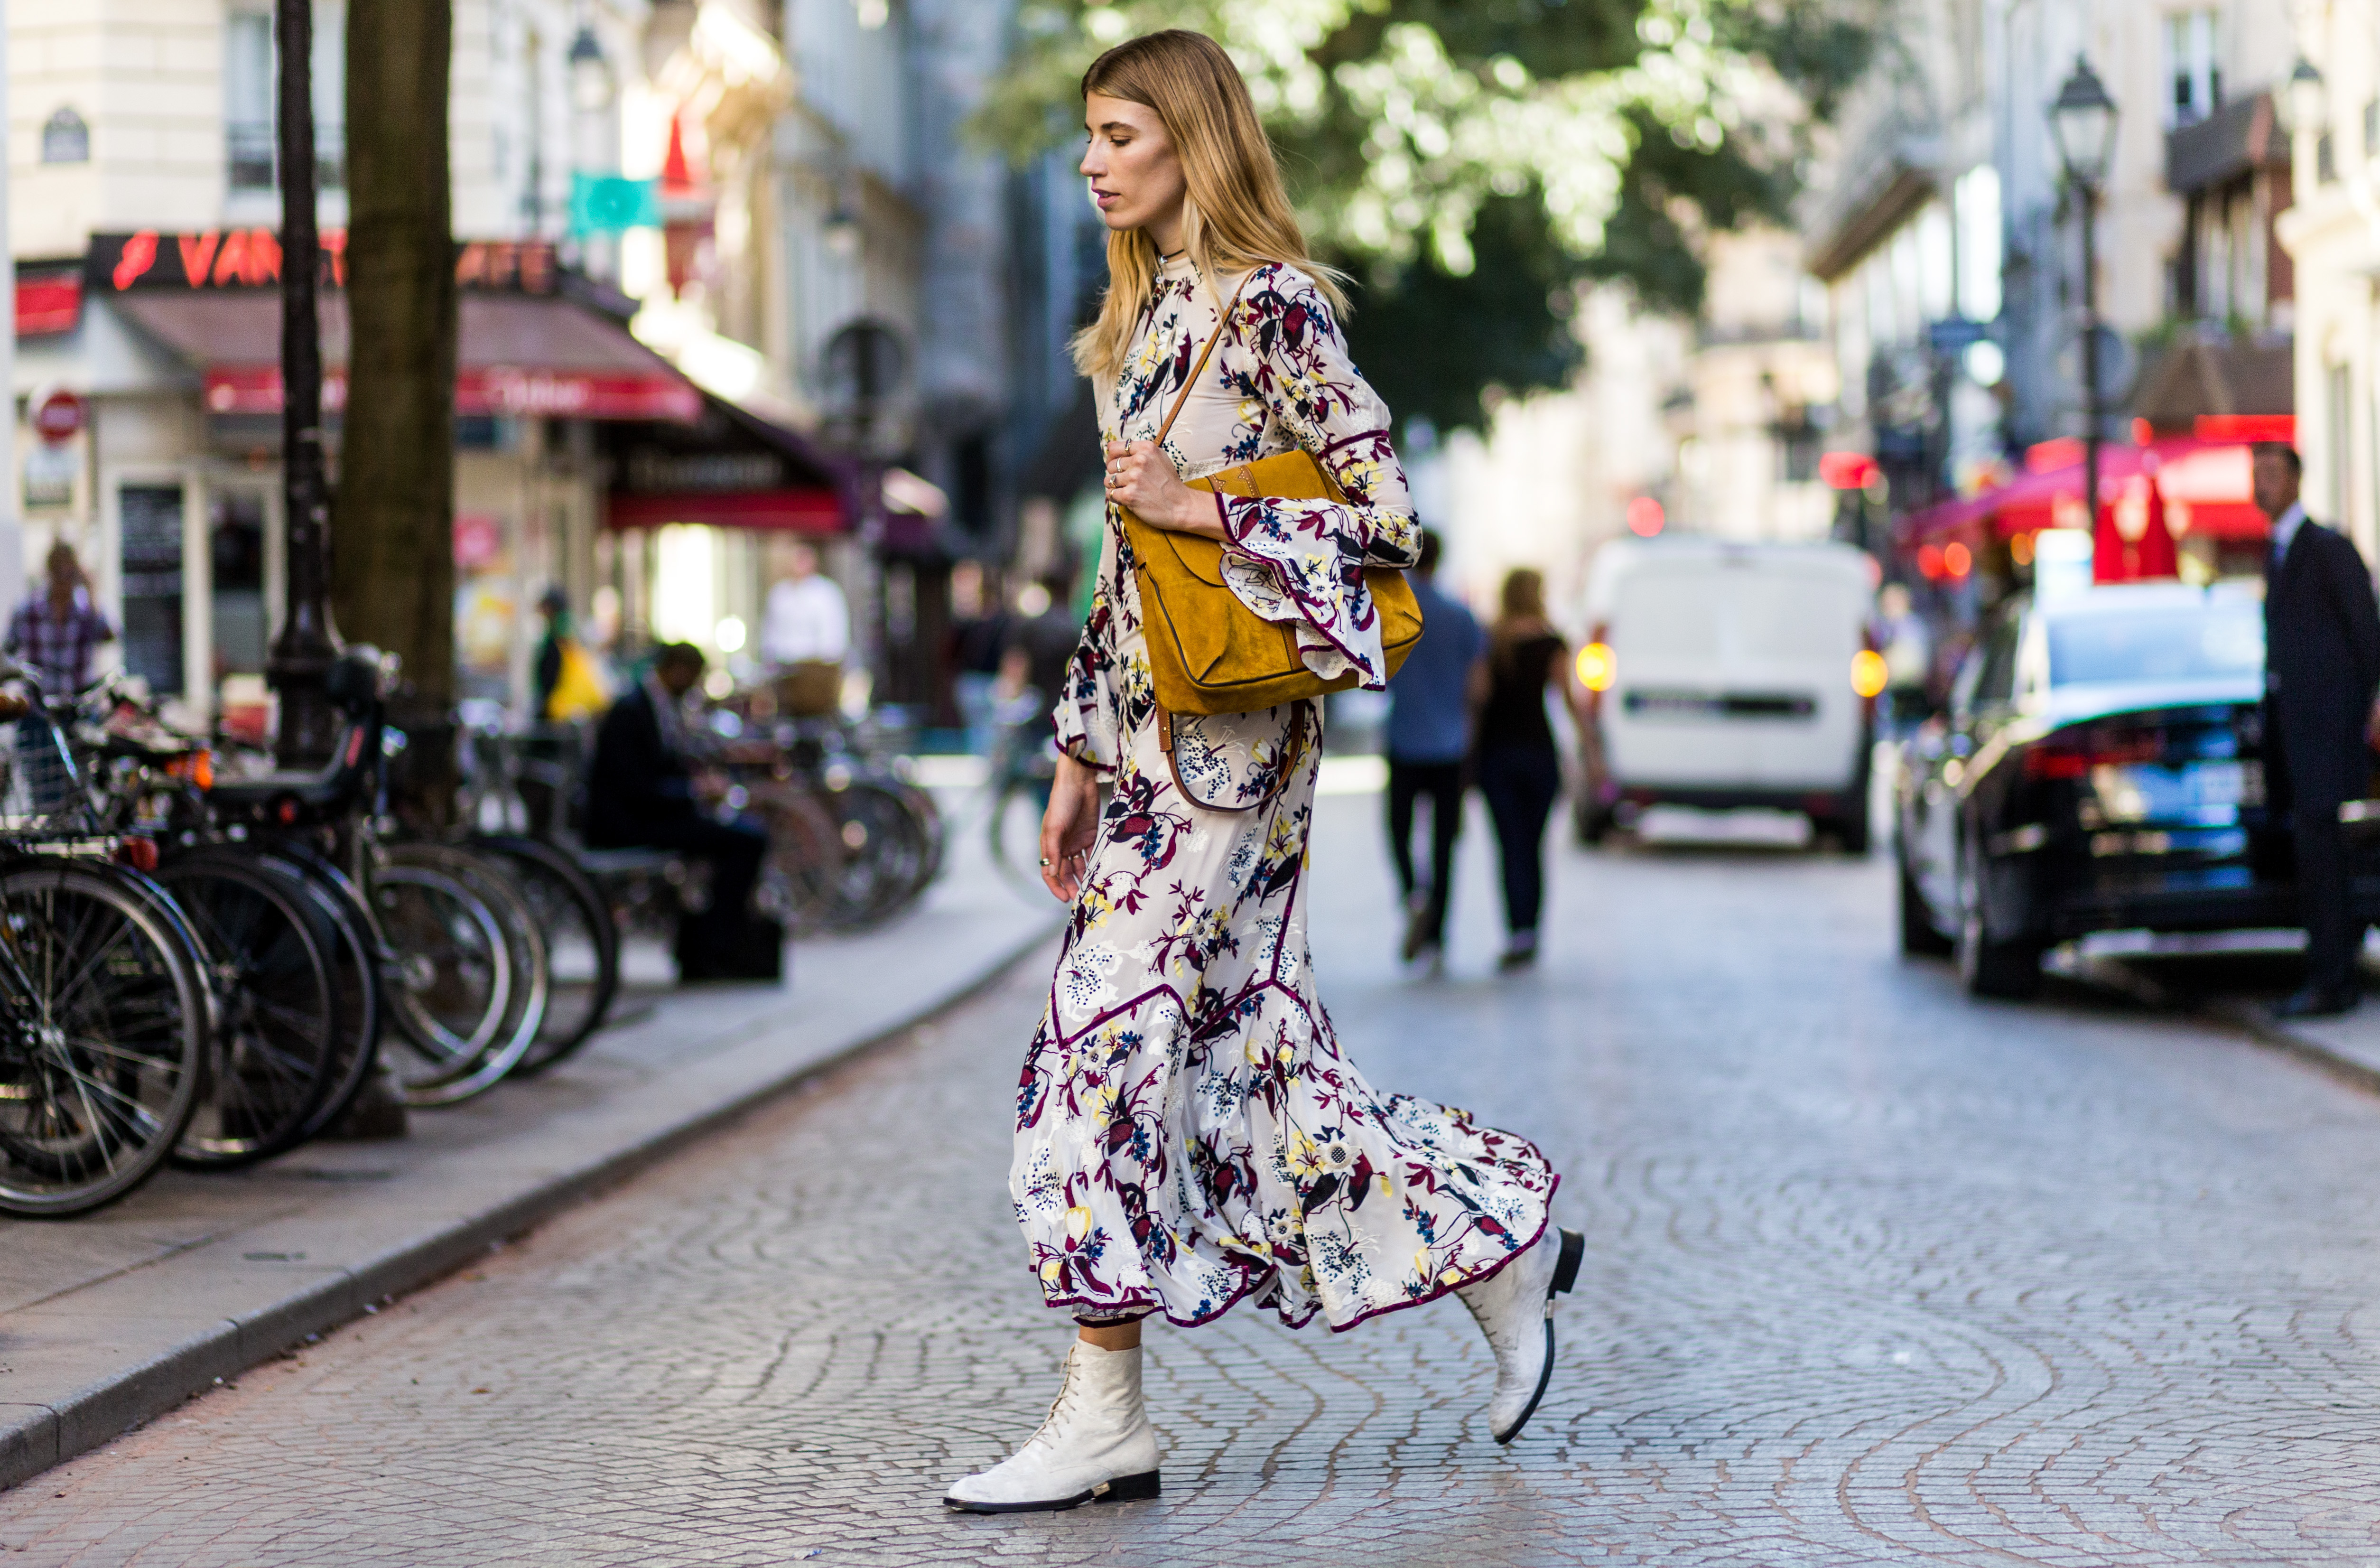 5 Street-Style Trends That Have Us Hitting 'Add to Cart'